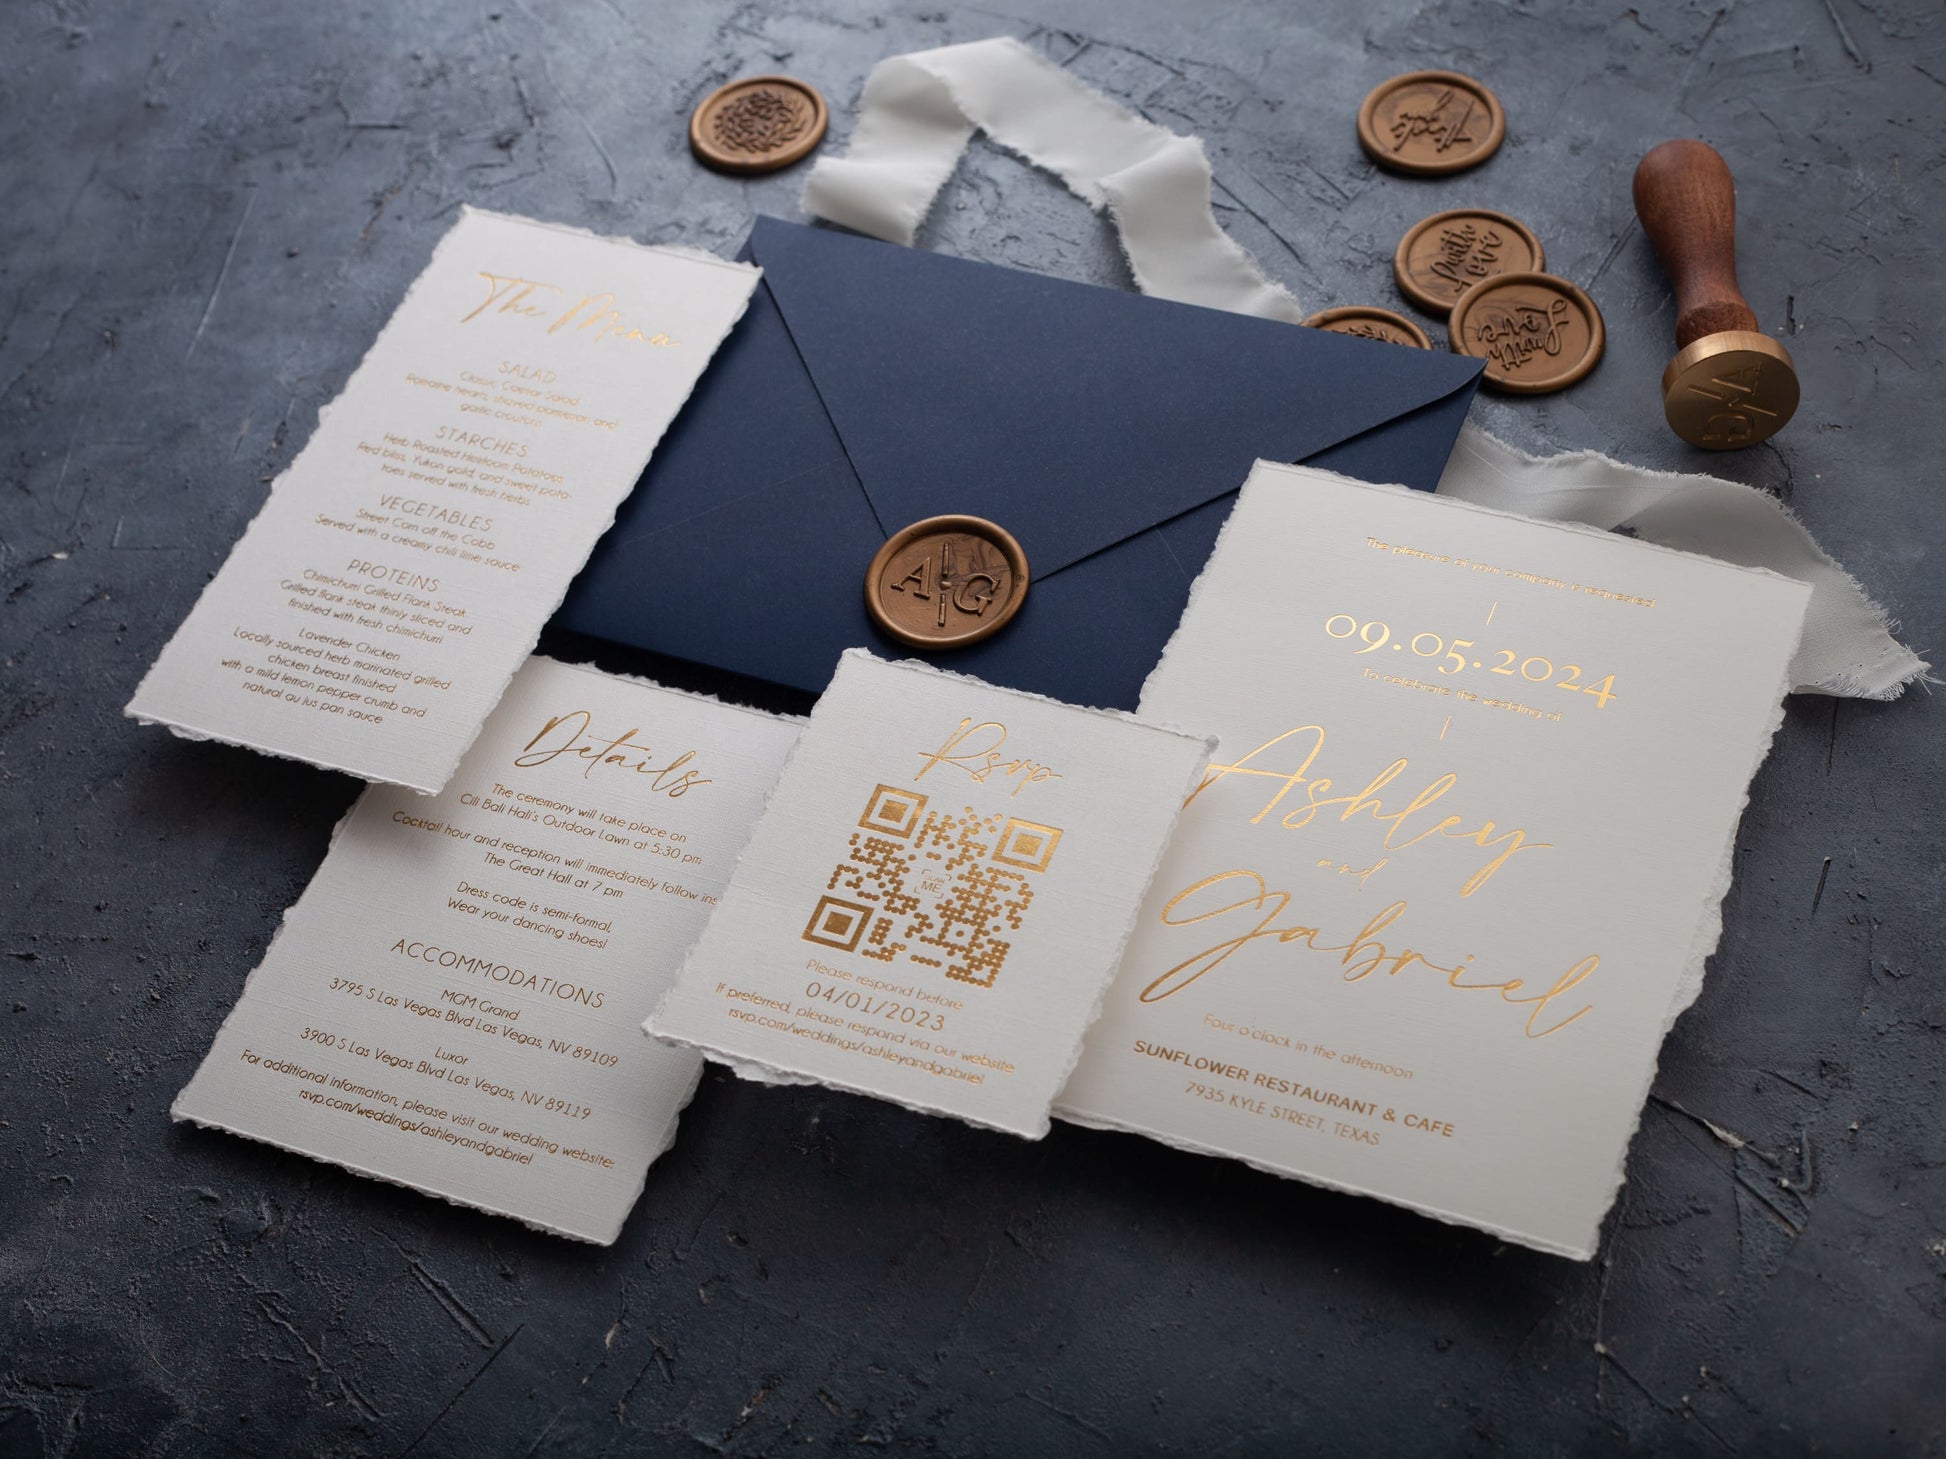 Deckled edge wedding invitation set, rsvp card with QR code, details card, menu and wax seal